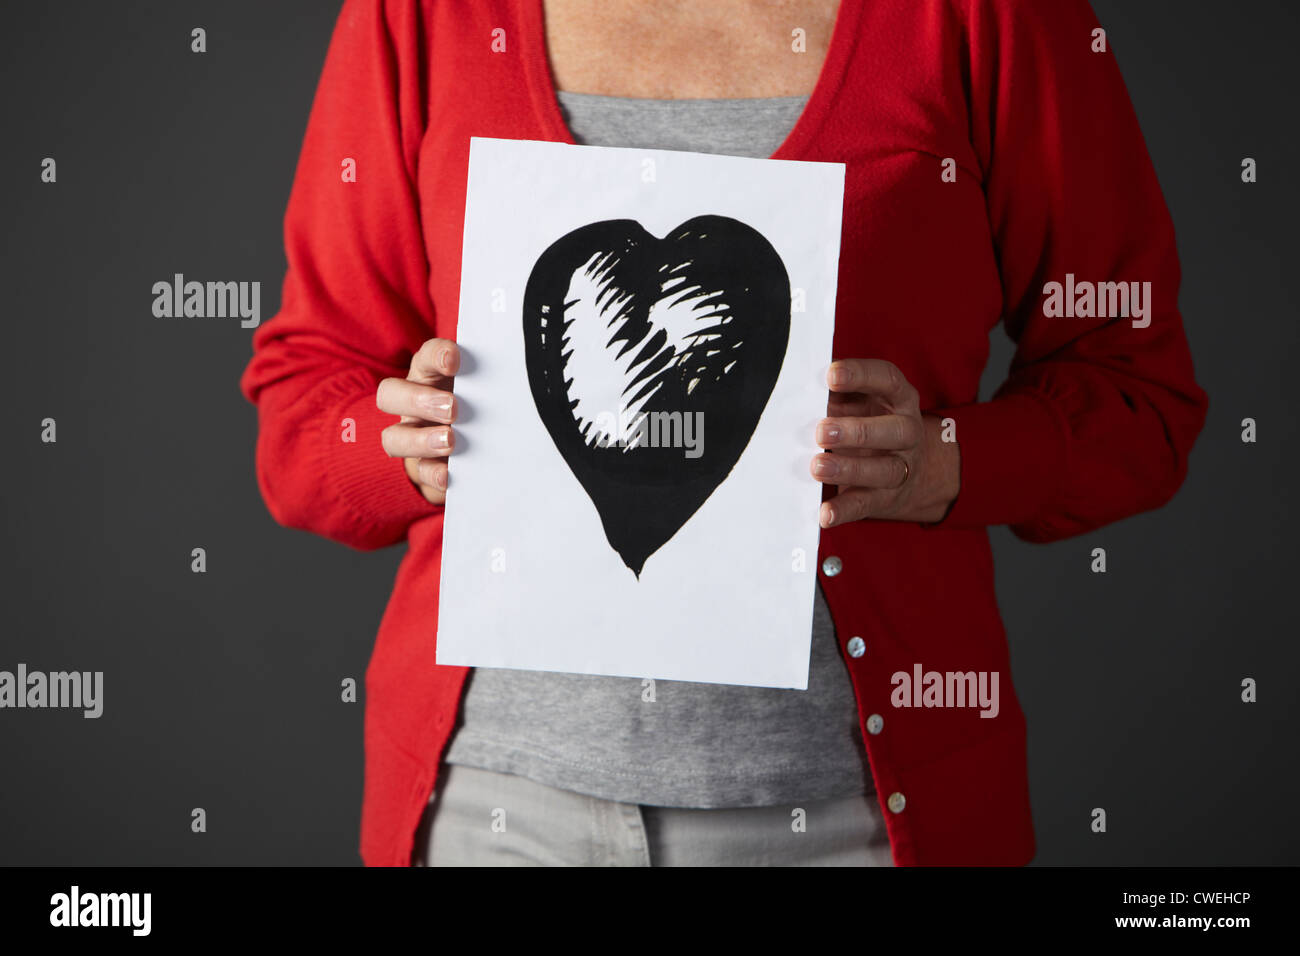 Senior woman holding ink drawing of heart Stock Photo